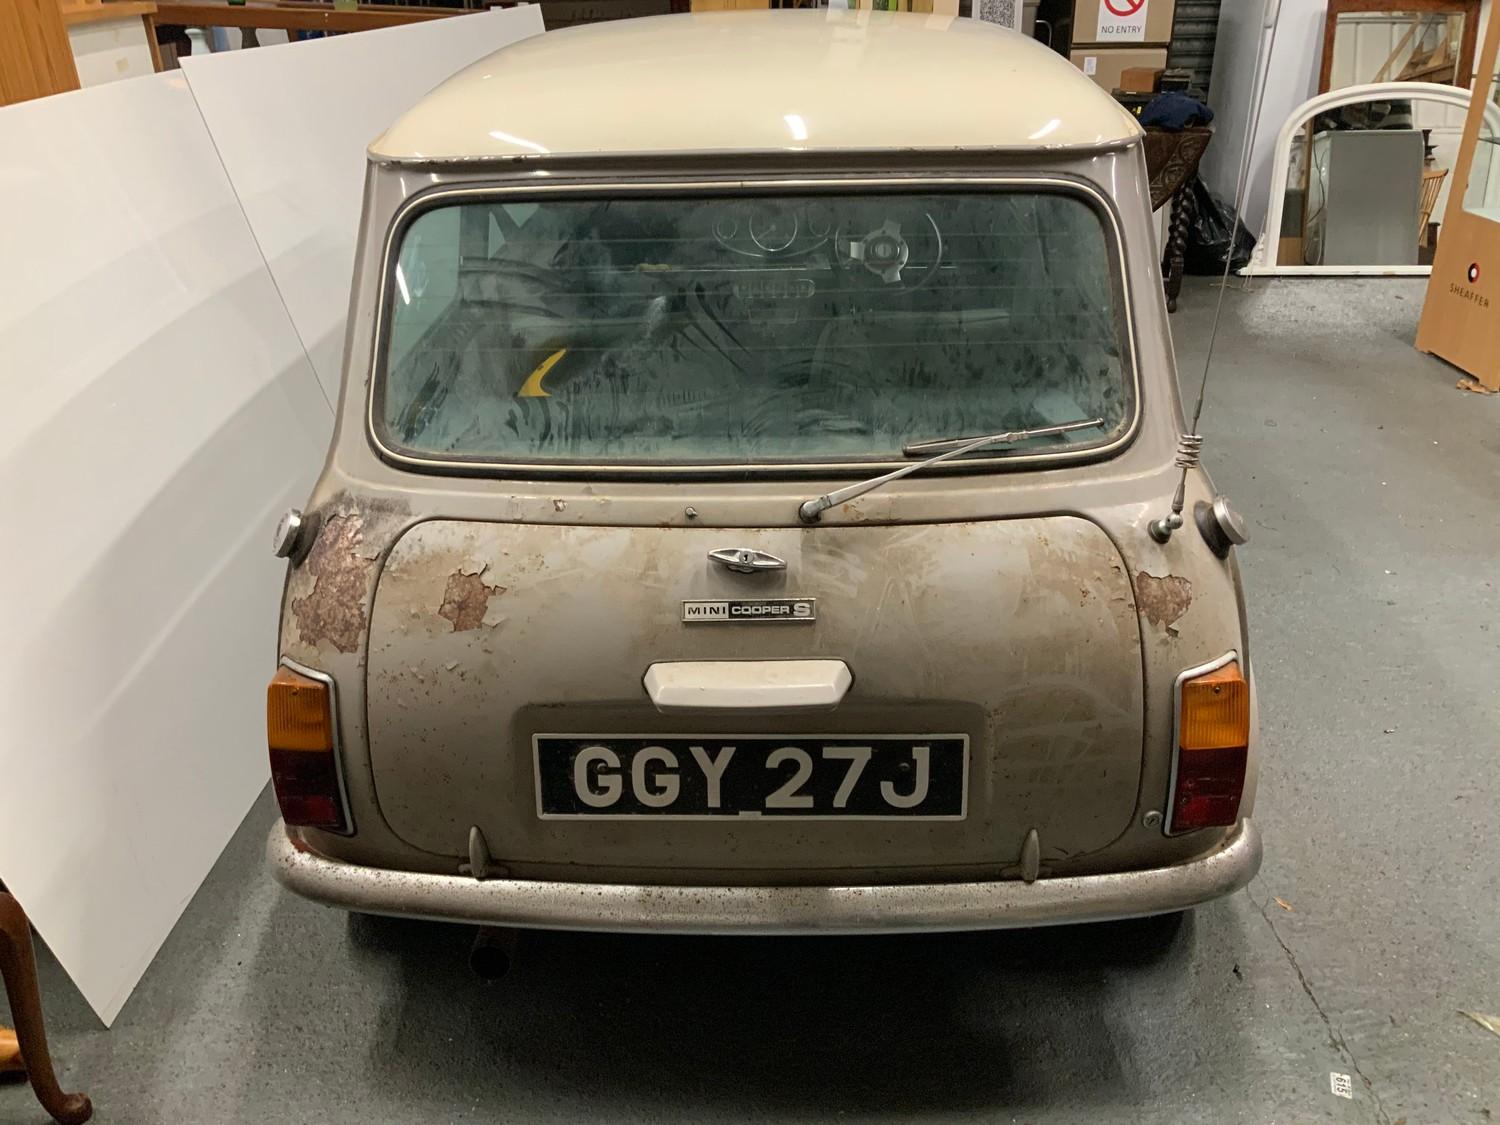 Mini Cooper S 1971 Reg: GGY 27J - 1275cc - Direct from Deceased Estate - Last Taxed in 1991 - Image 2 of 23